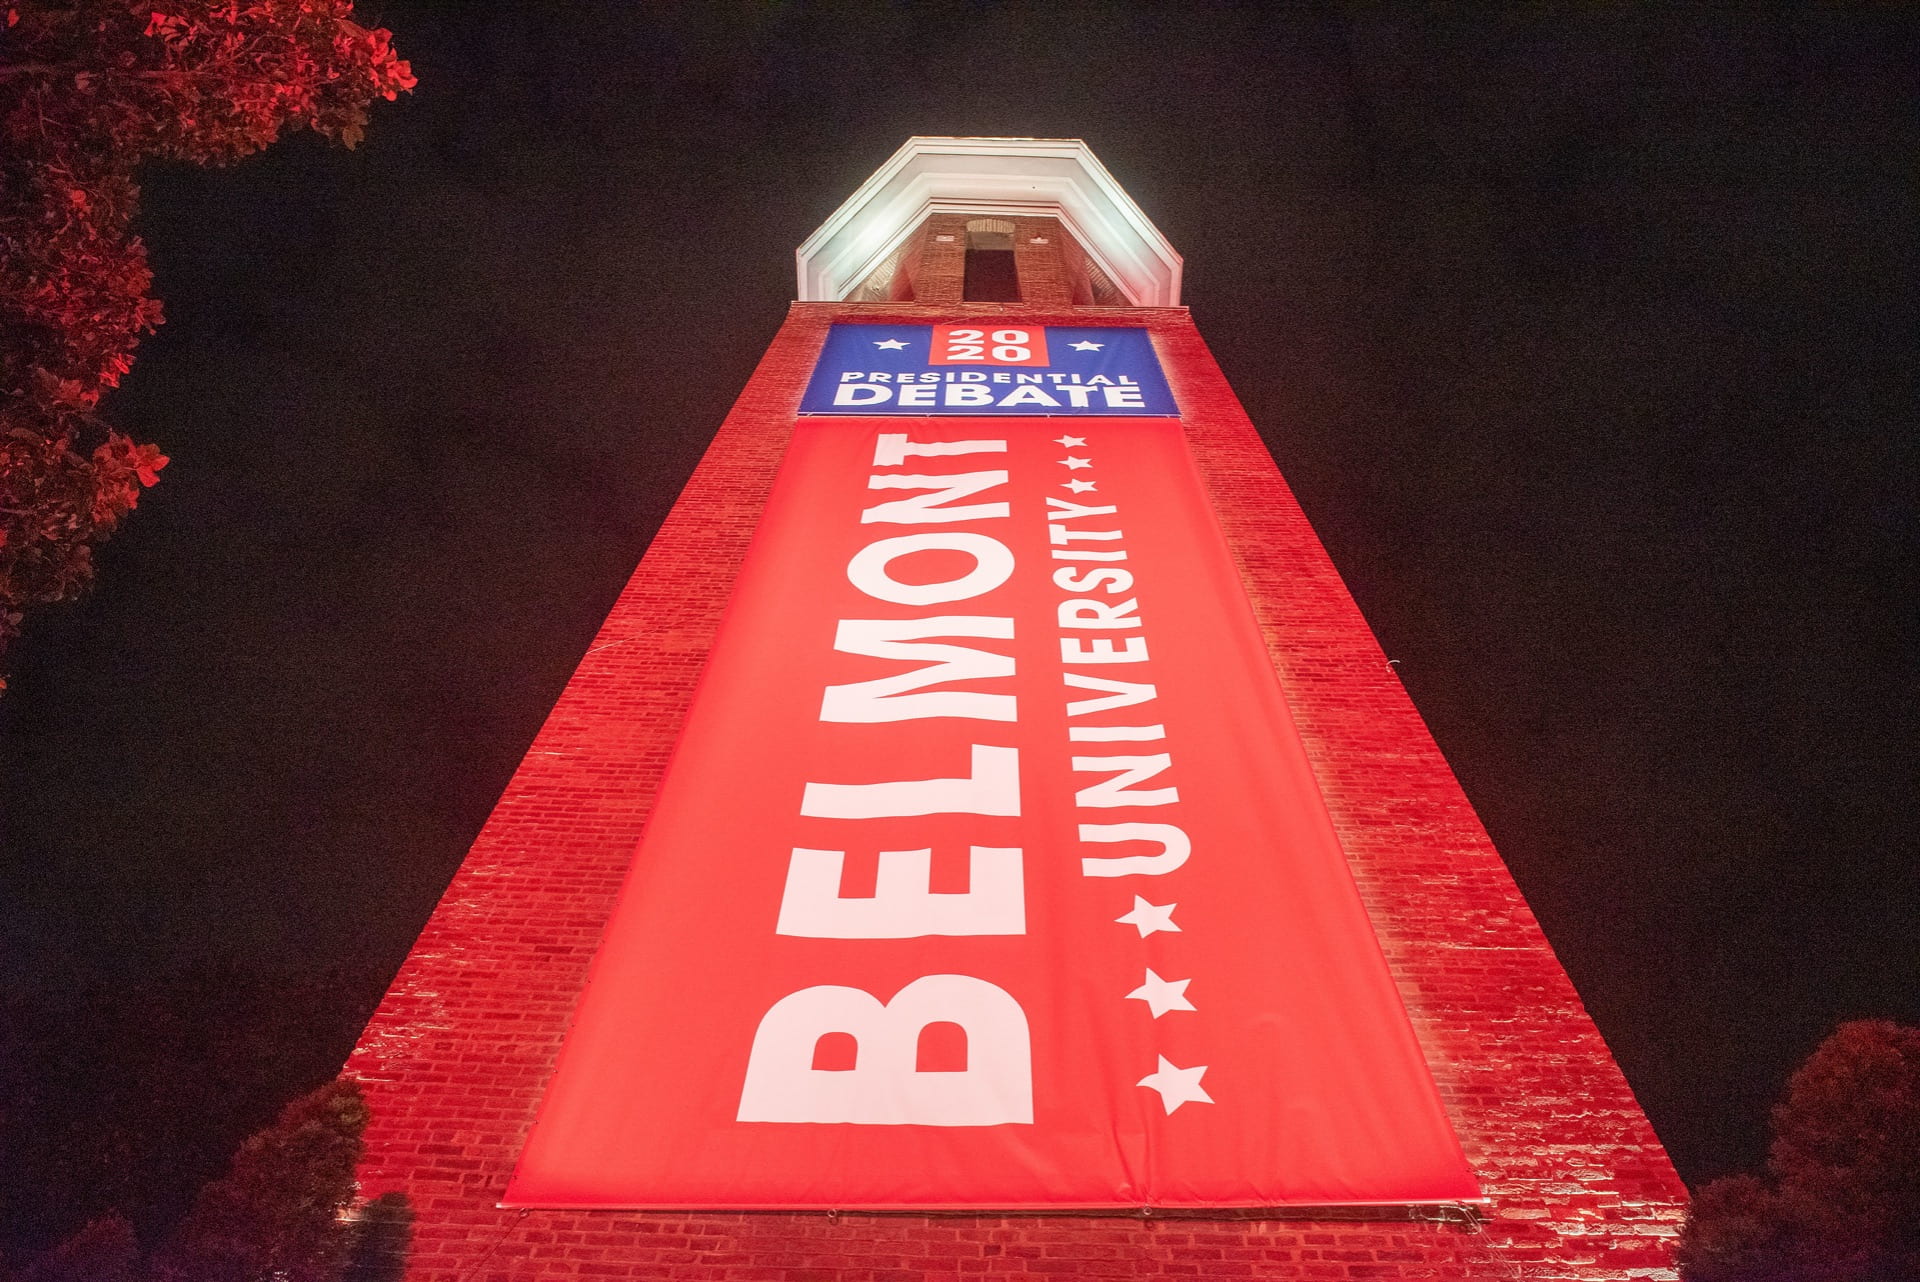 Belmont 2020 Debate Banner on the bell-tower at night